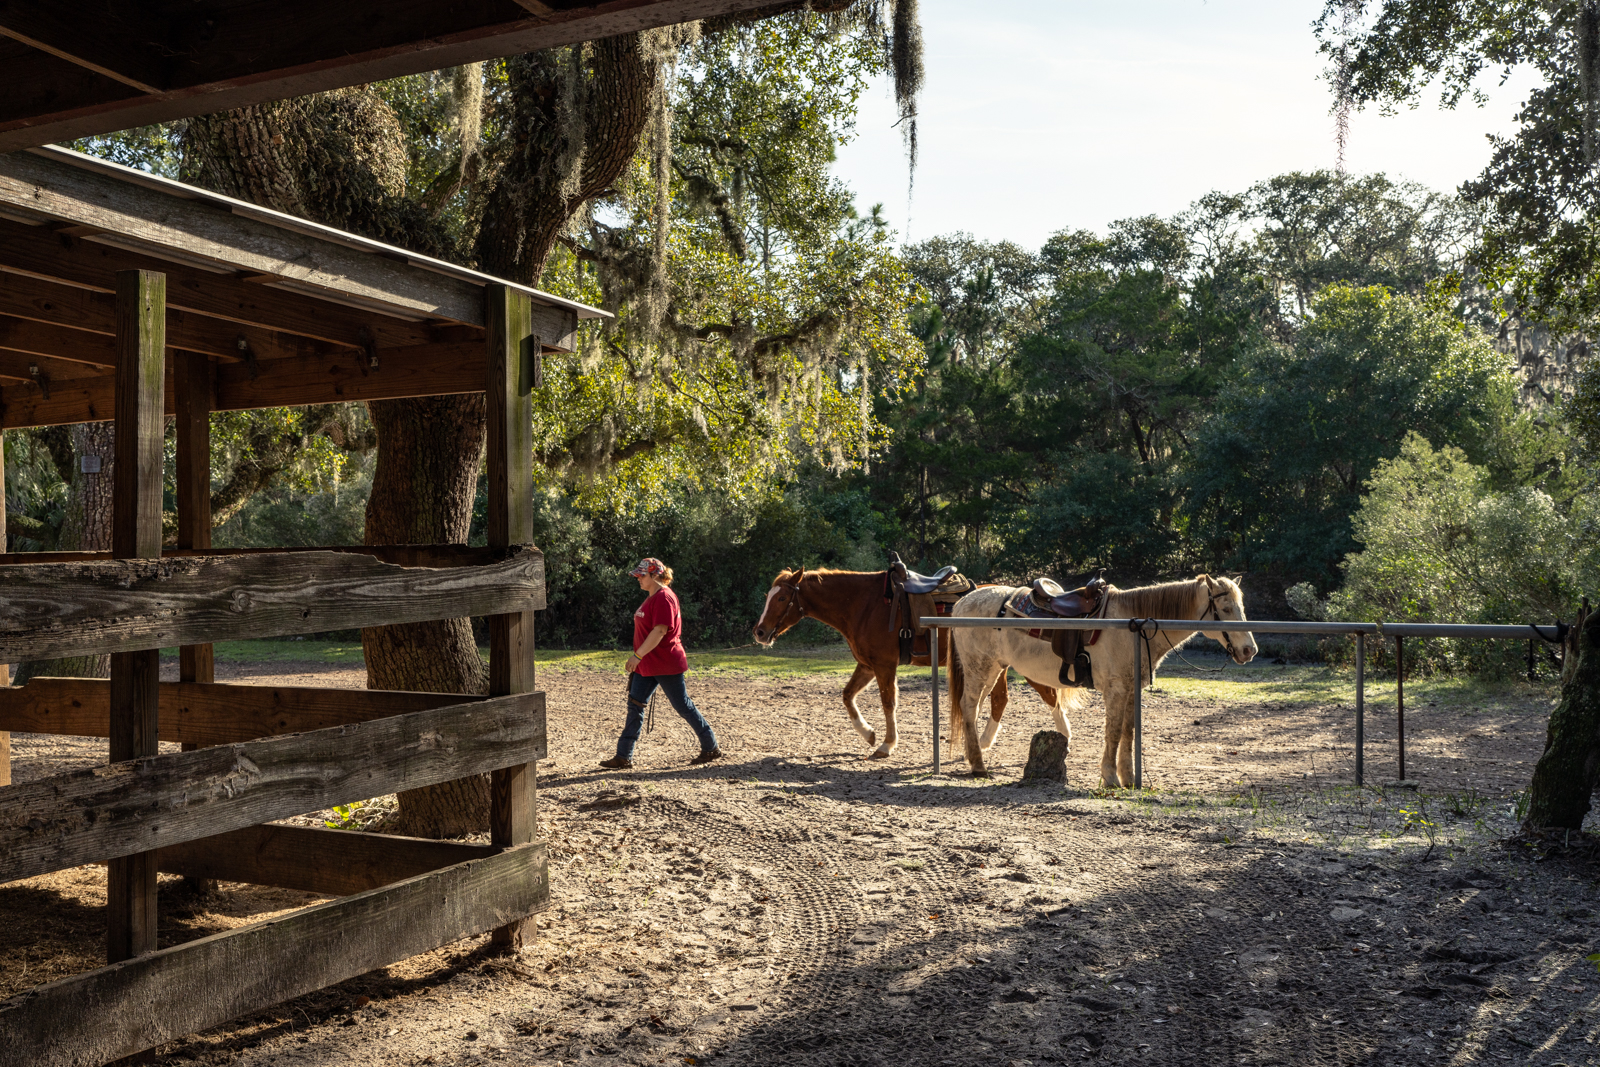 A woman in a red t-shirt and hat walks away from two horses, one which is white and one which is brown. Both are weraing saddles and harnesses and are tied up to a metal pole. There is part of a barn on the left hand side of the photo and trees in the background. Tire tracks are in the sand in the foreground.